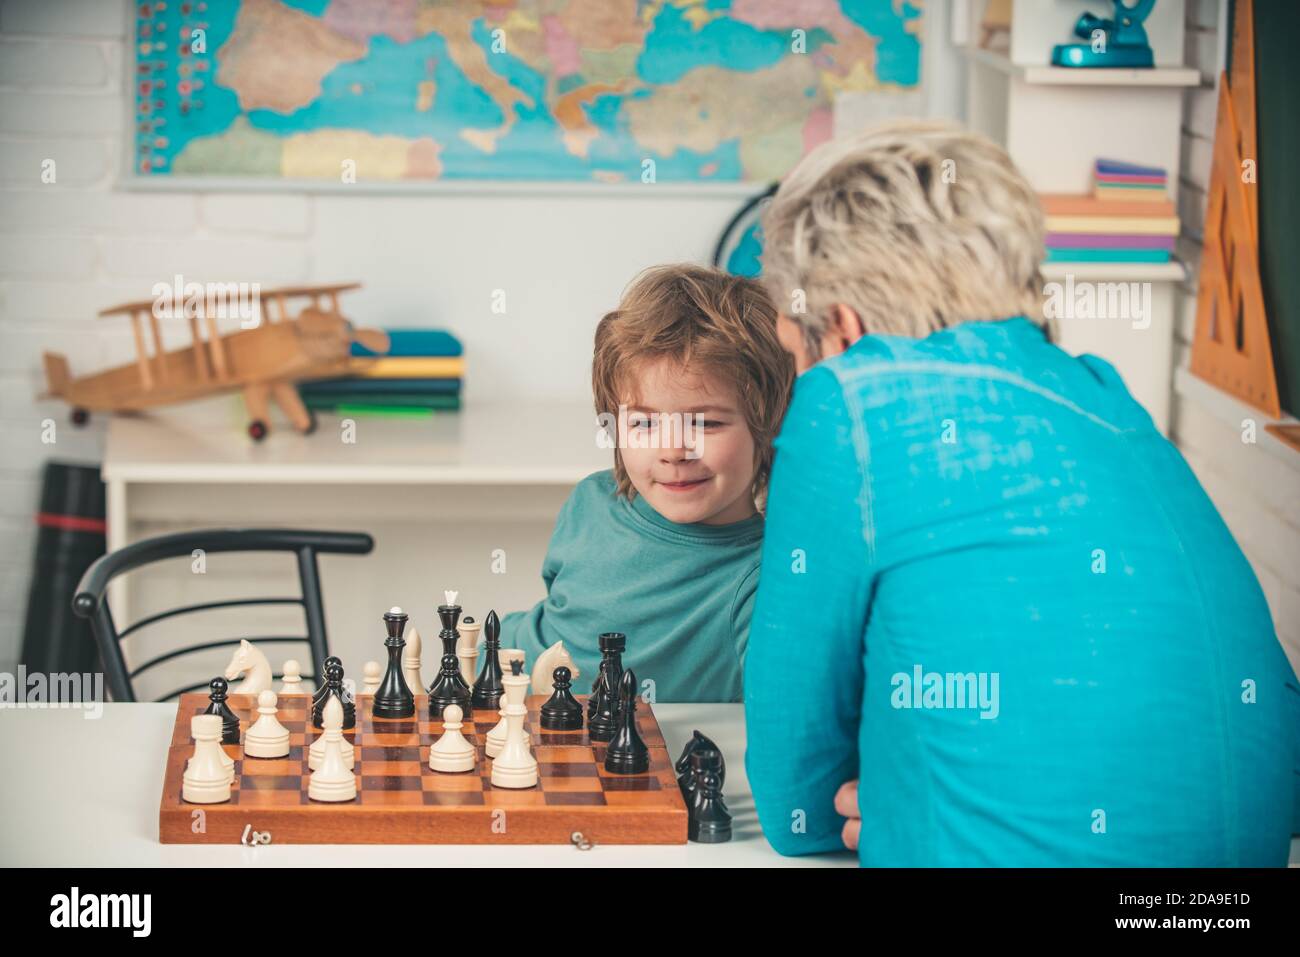 Boy kid playing chess at home. Games and activities for children. Family concept. Stock Photo